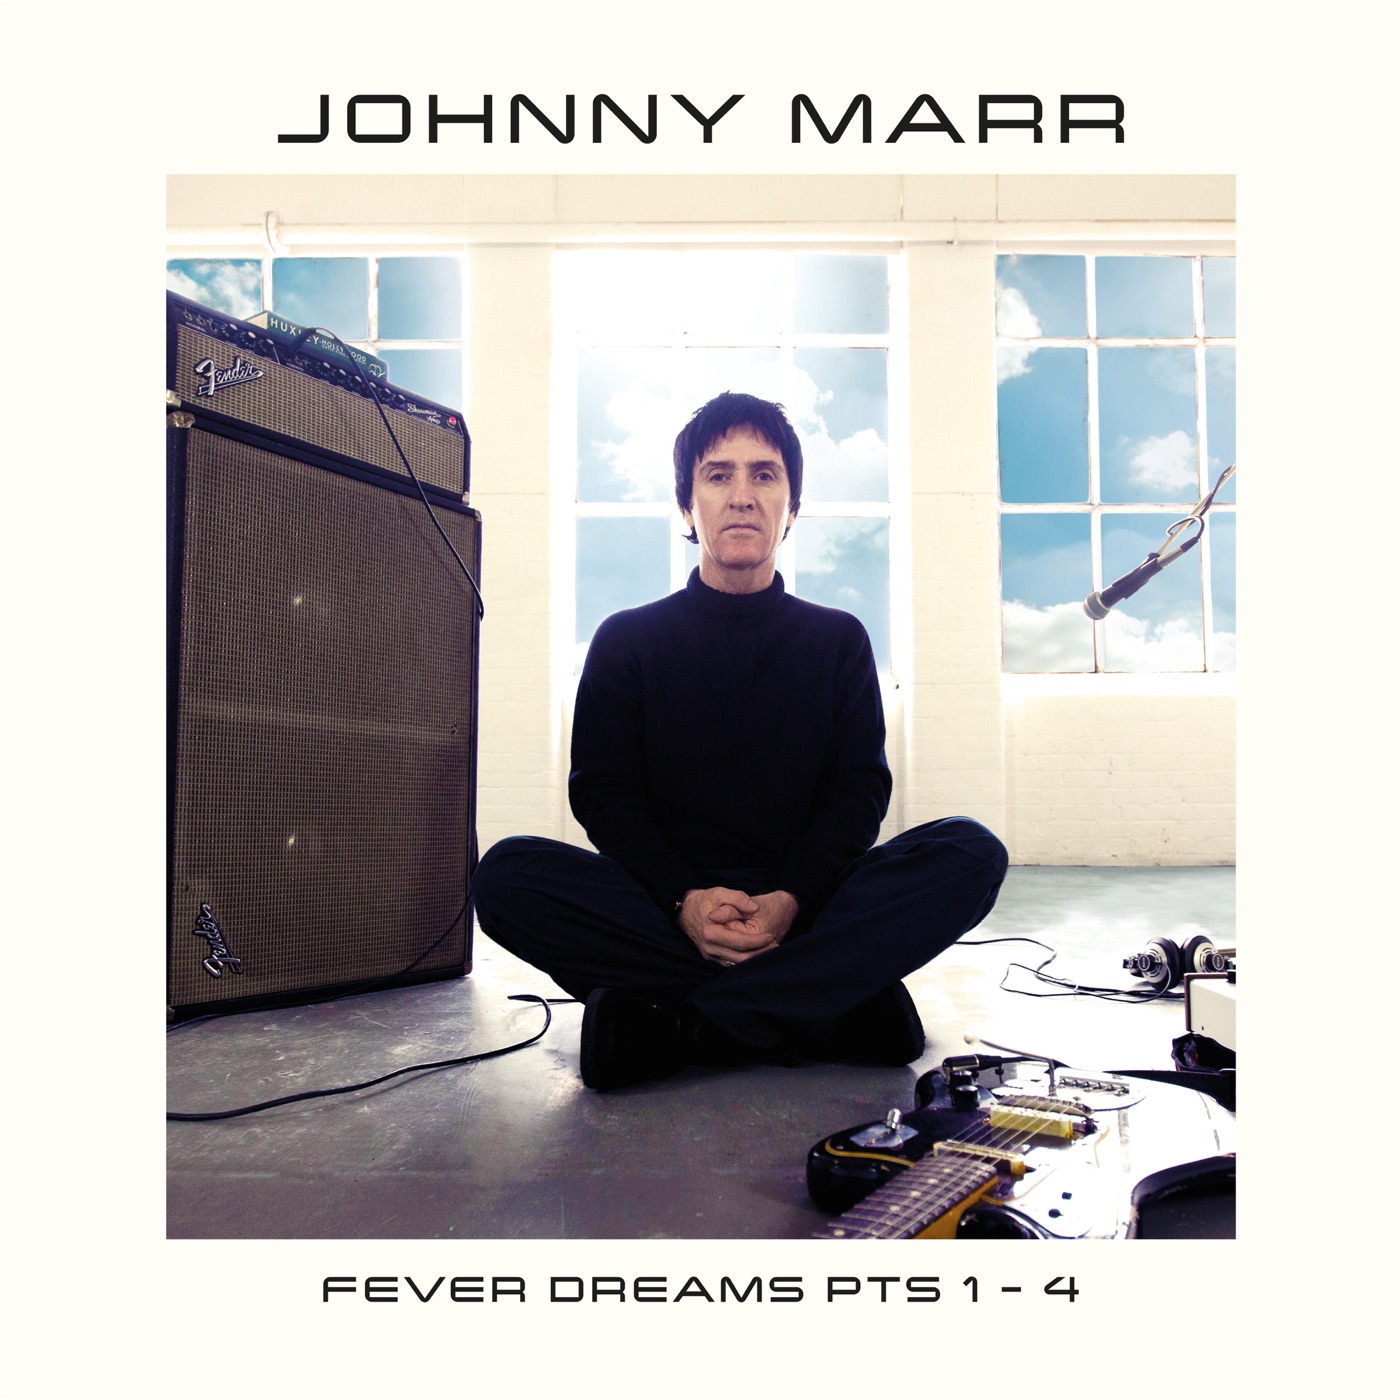 Fever Dreams Pts 1 - 4 by Johnny Marr